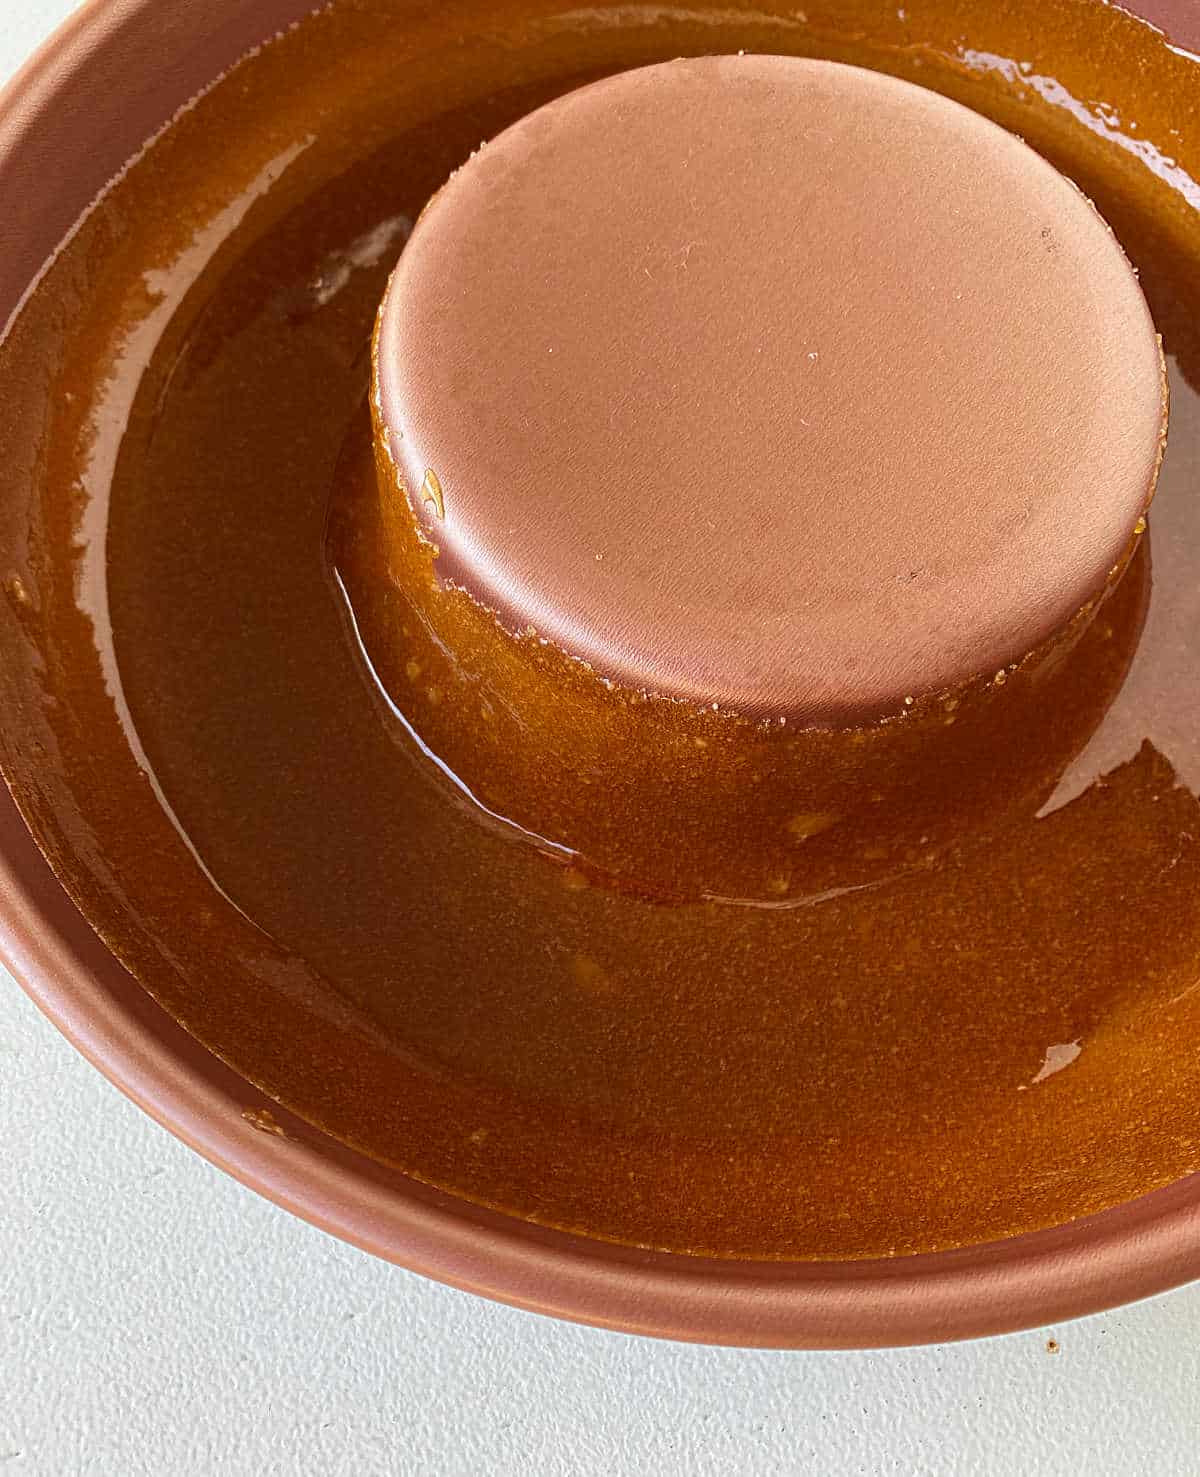 Partial view of copper flan pan coated with caramel on white surface.